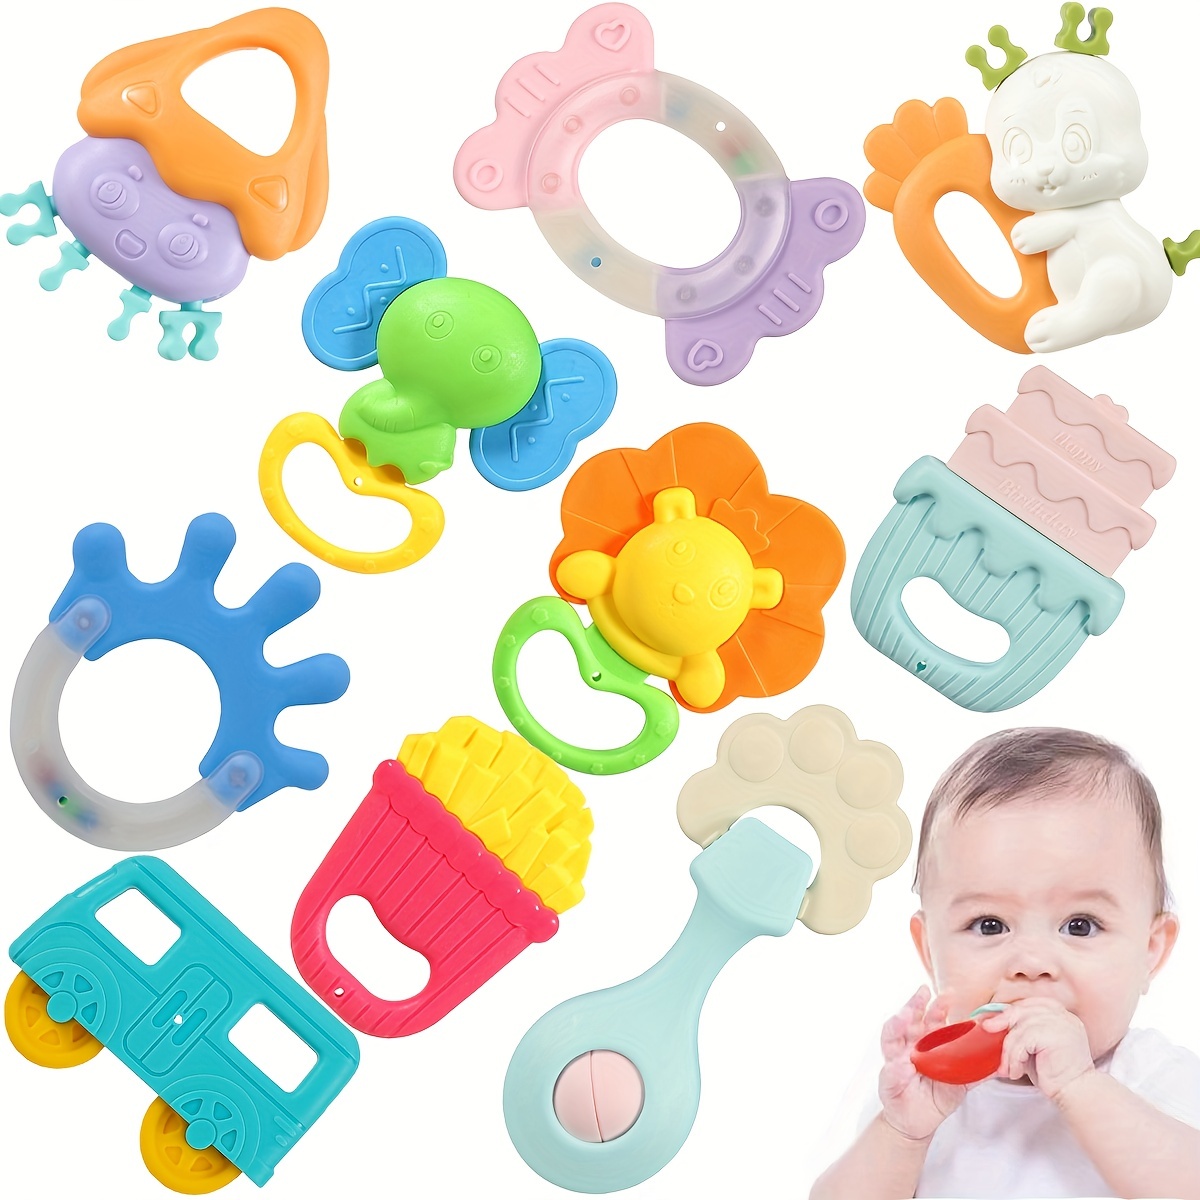 GOODWAY Baby Rattle Sensory Teething Toys for Babies 0-6 Months, Hanging  Toys,Baby Teether Toy for 3-6,6 to 12 Months Newborn,Boy,Girl,Teething Ring  